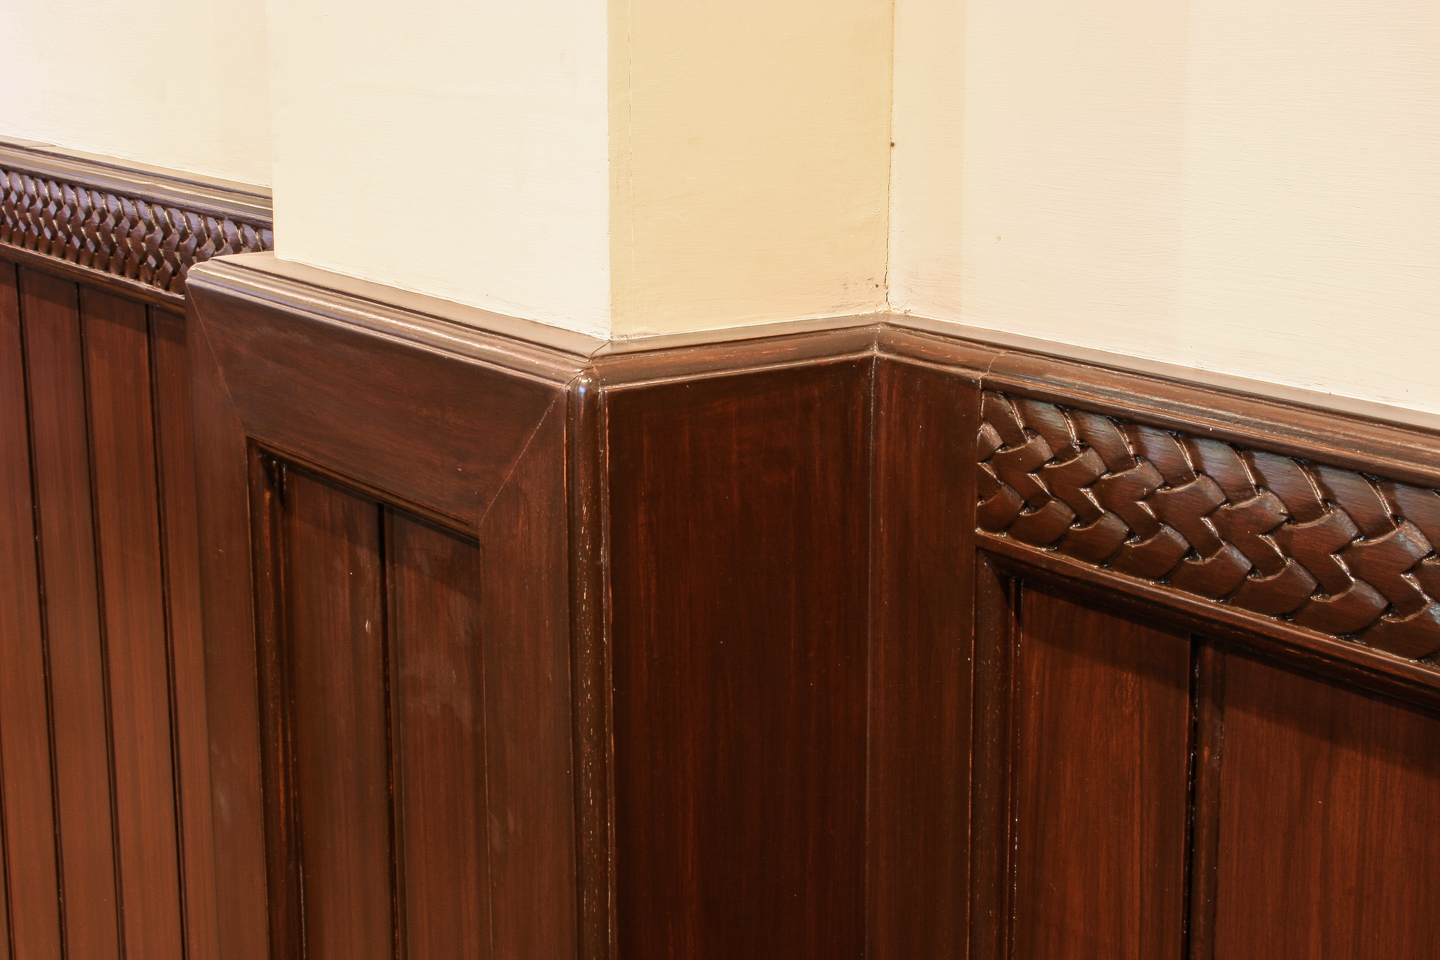 Carved wood panelling in the conference room.